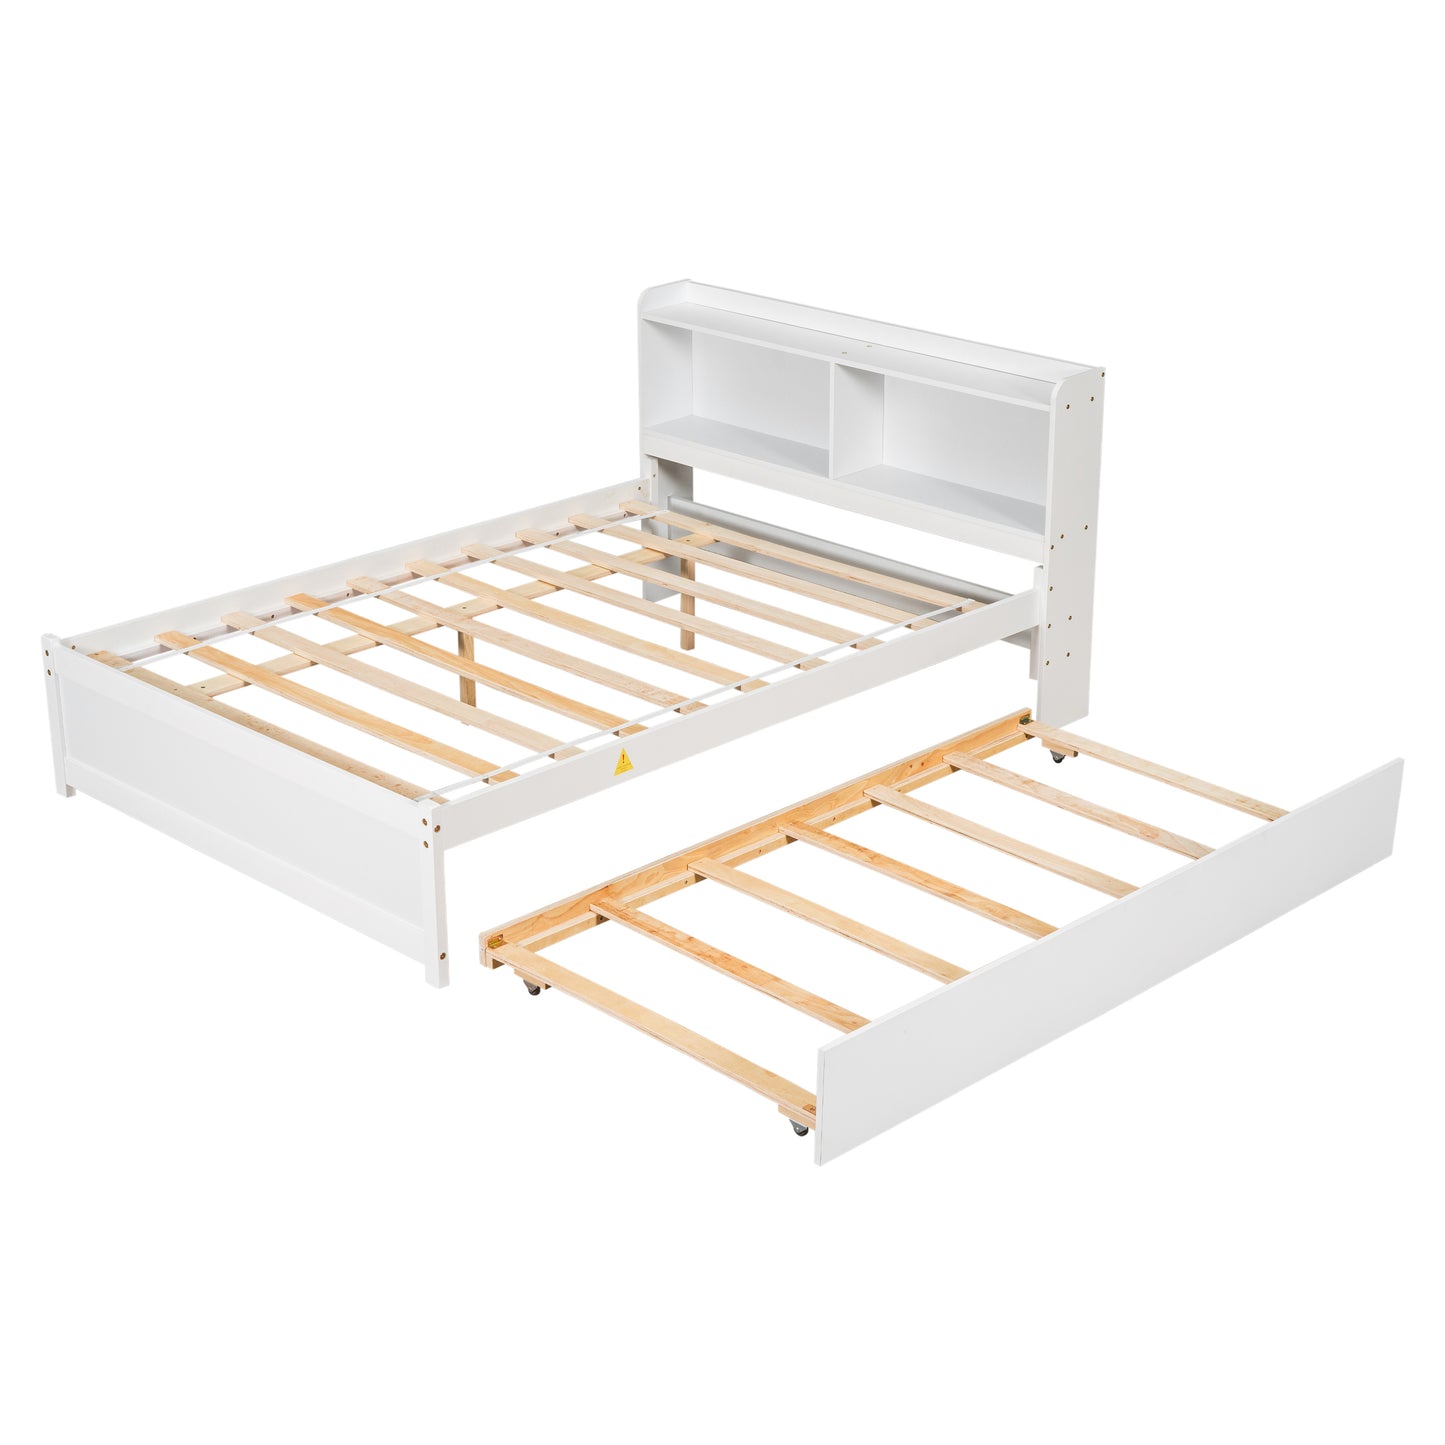 Full Platform Bed with Trundle, Bookcase, White